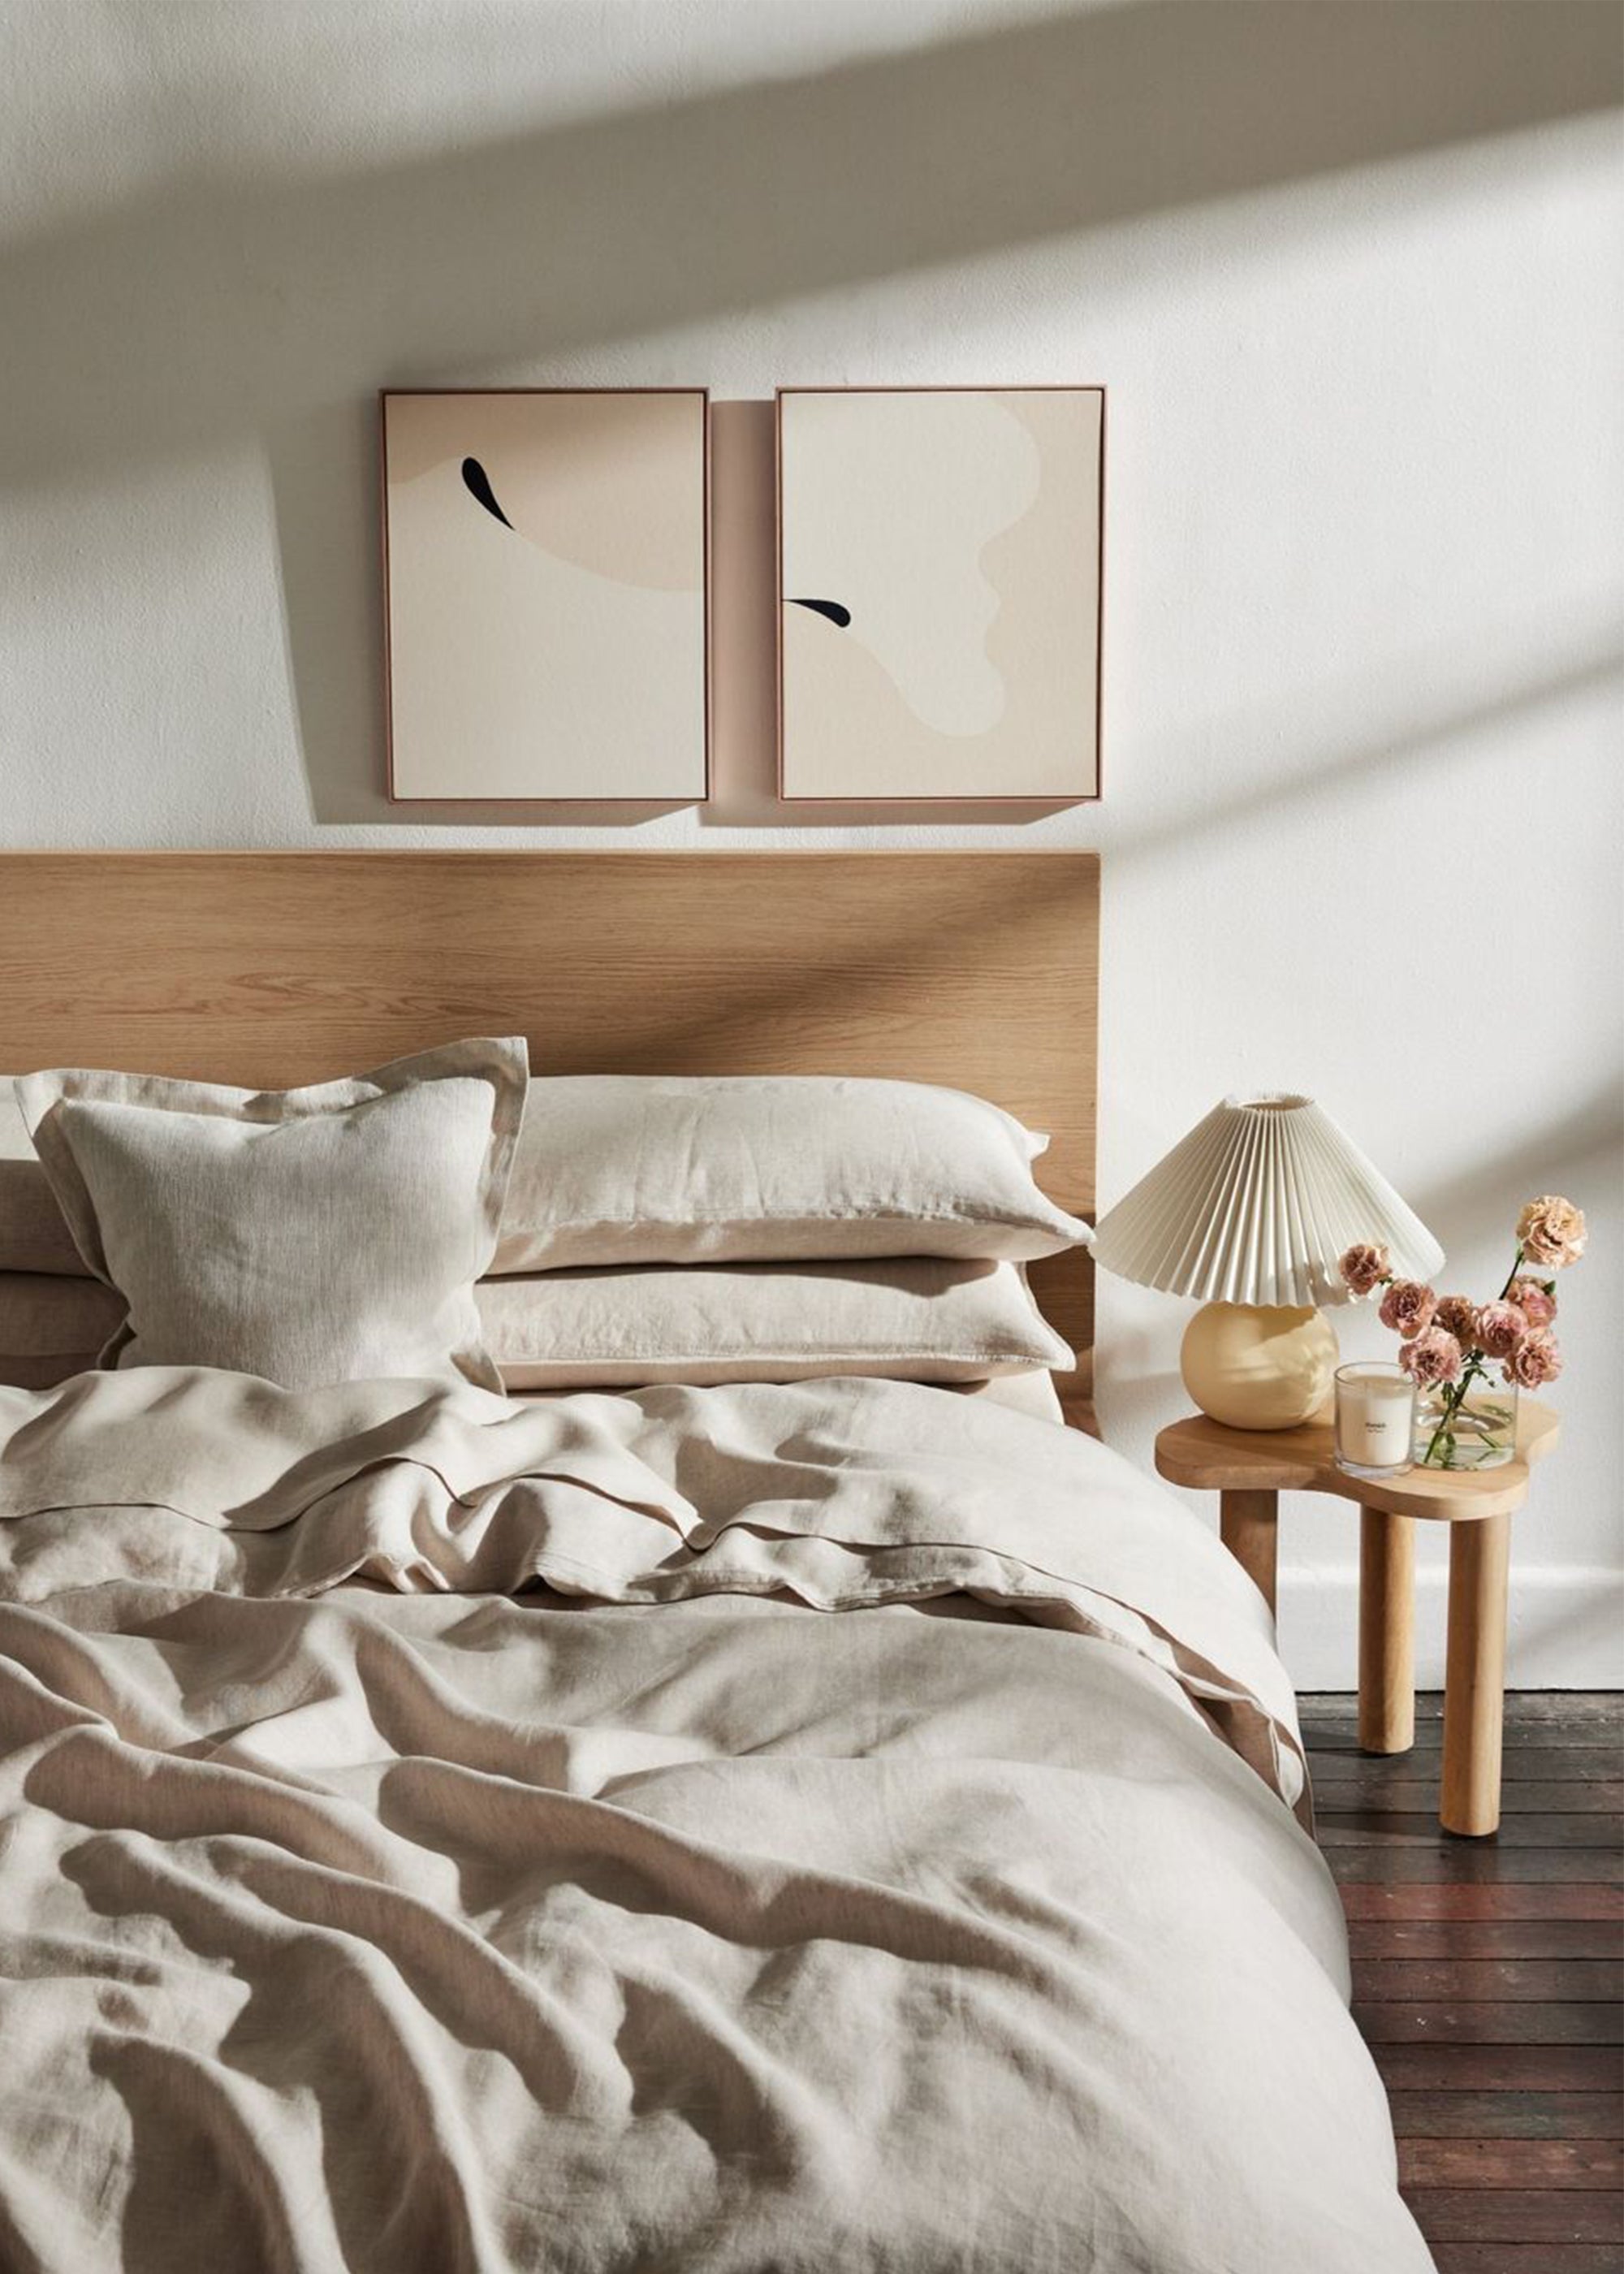 30 Awesome Bedside Table Ideas and Designs — RenoGuide - Australian  Renovation Ideas and Inspiration